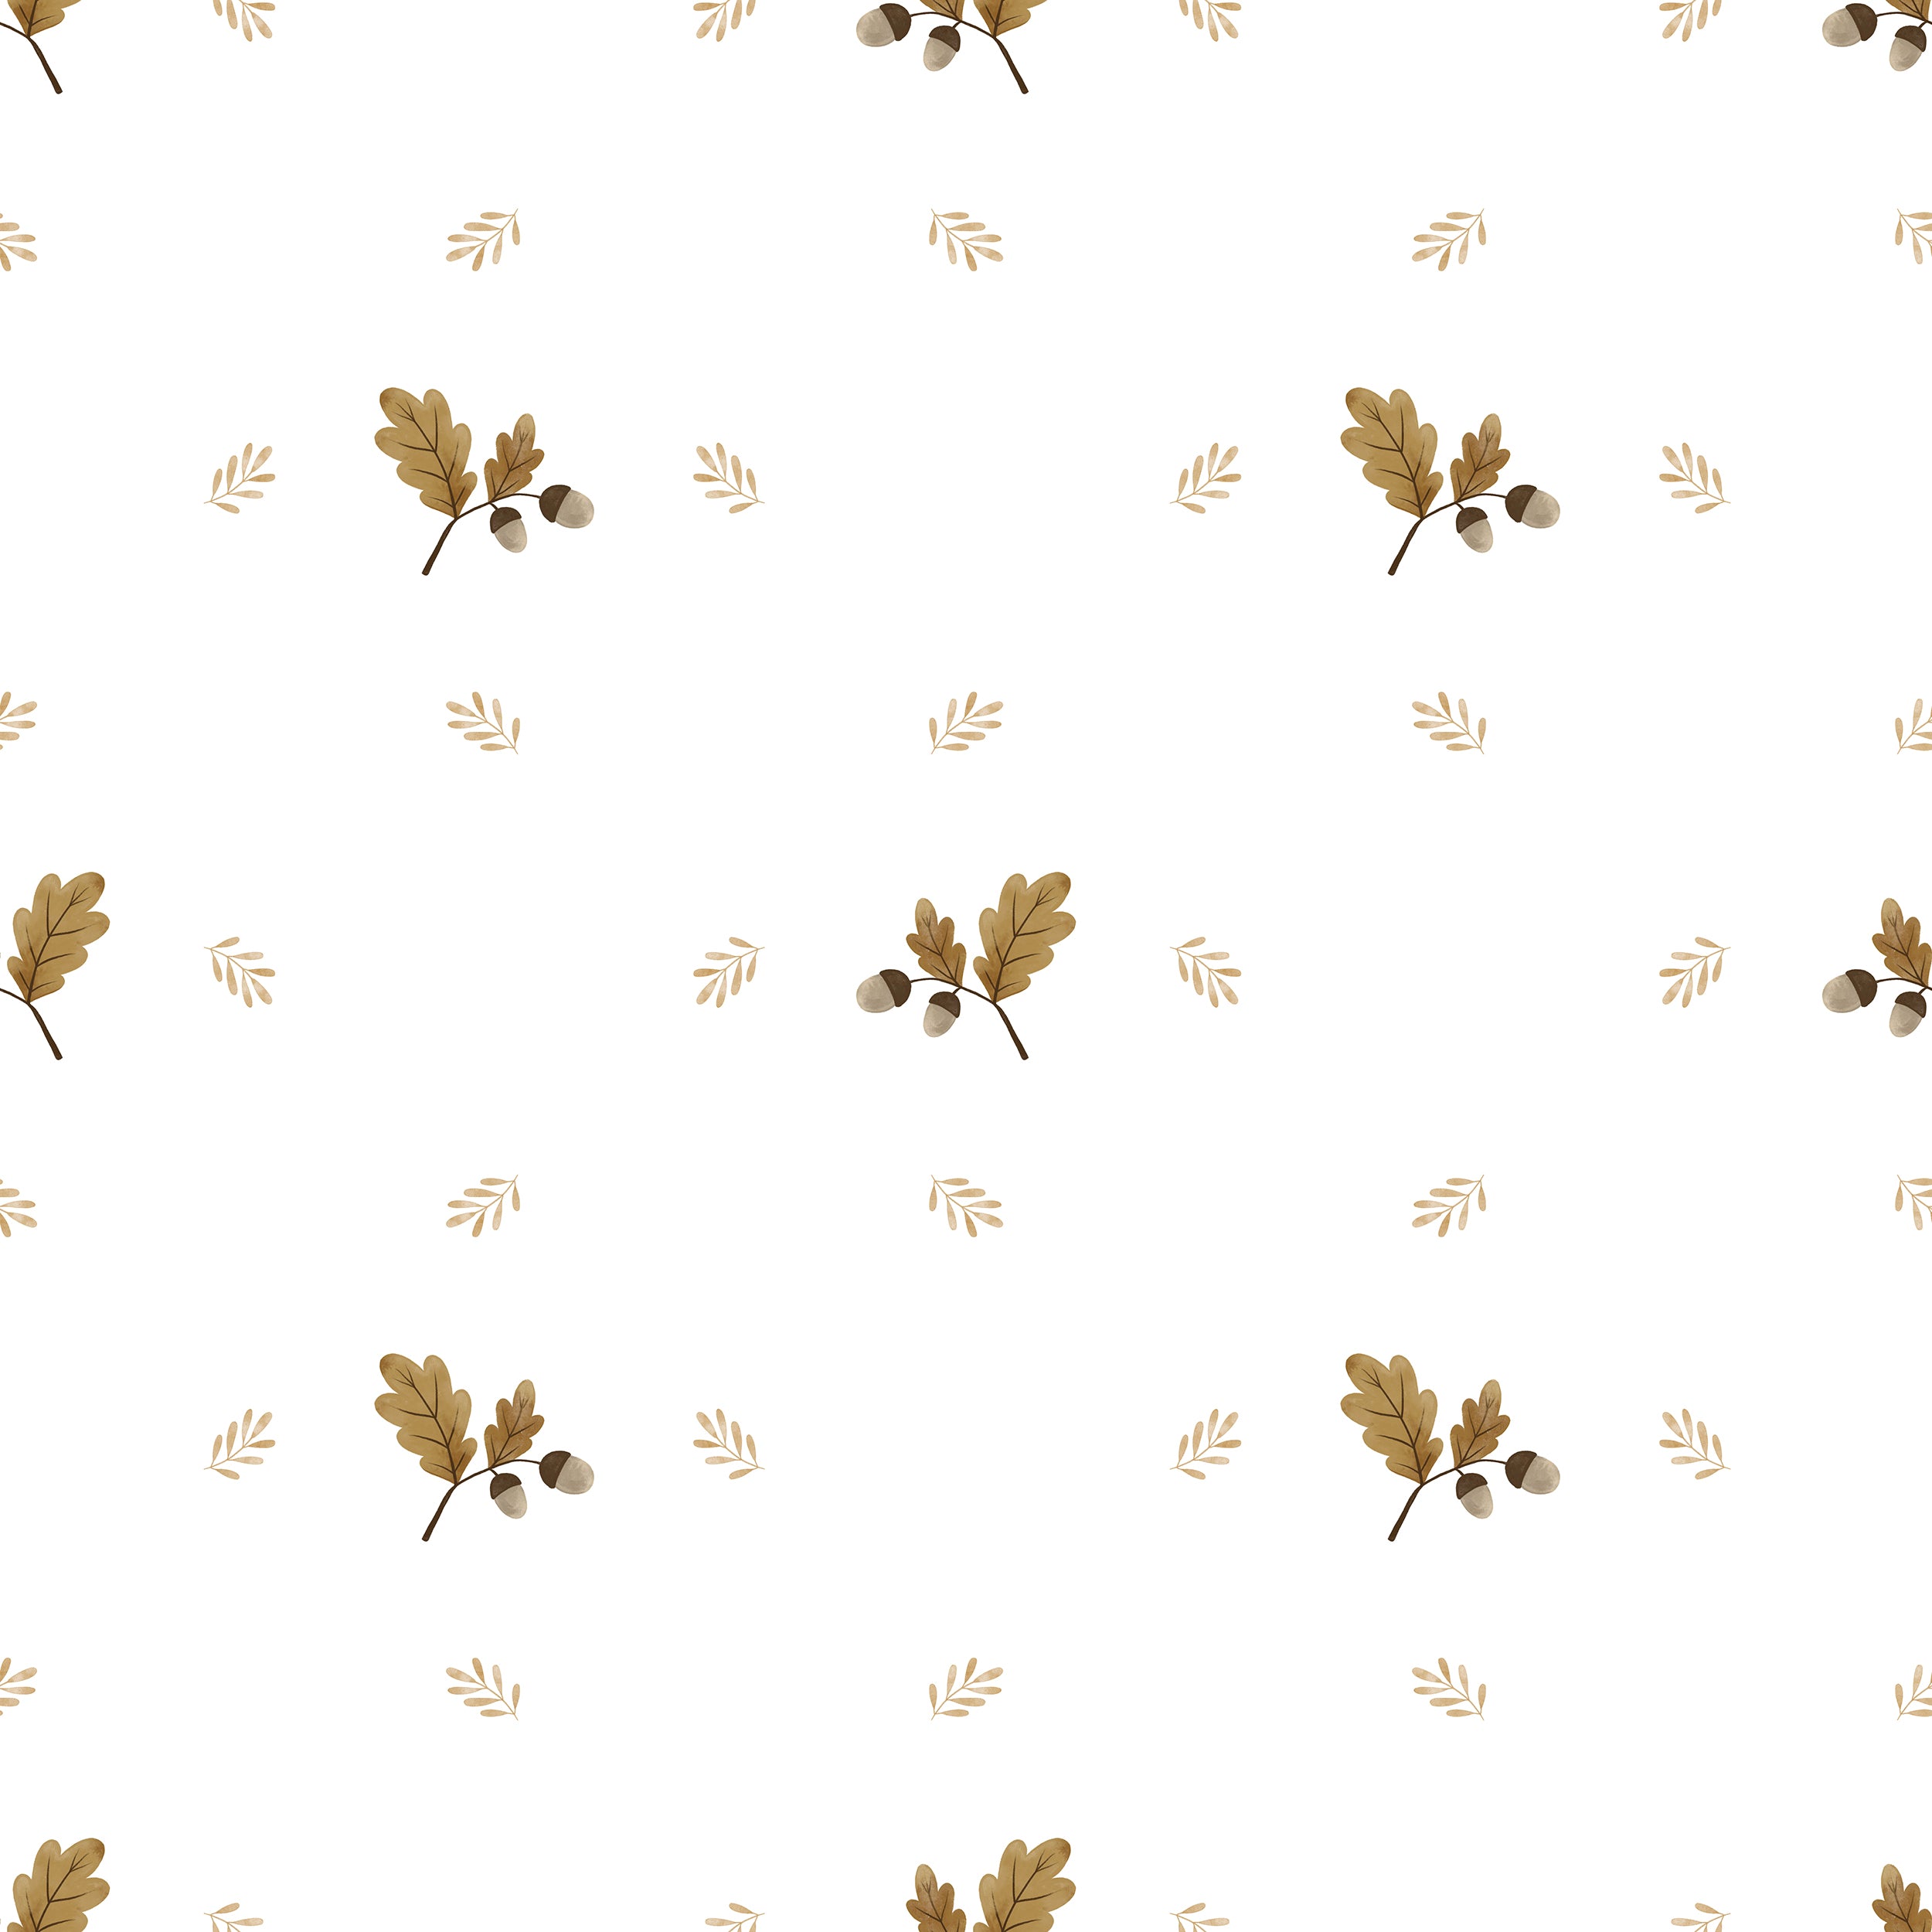 Detailed close-up of Forest Leaf Wallpaper featuring delicate illustrations of oak leaves and acorns interspersed with small, light brown twigs on a soft white background, conveying a serene and natural aesthetic